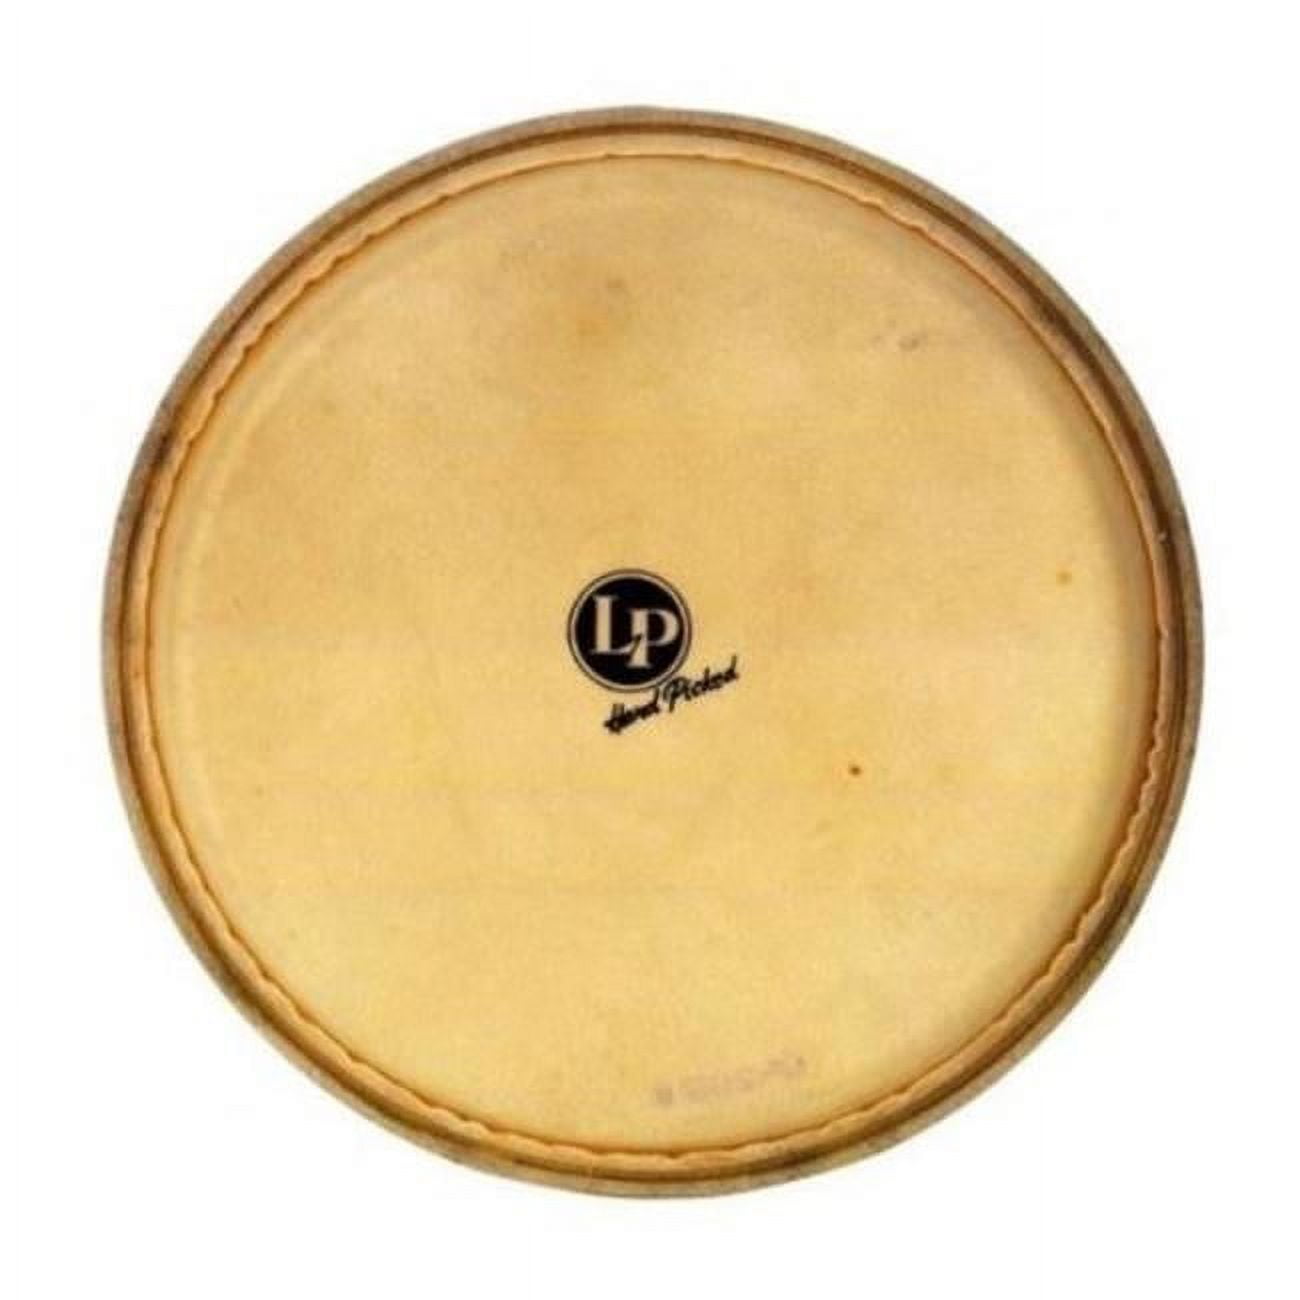 UPC 731201759595 product image for Latin Percussion LP274D 14 in. Replacement Head for Super Tumba | upcitemdb.com